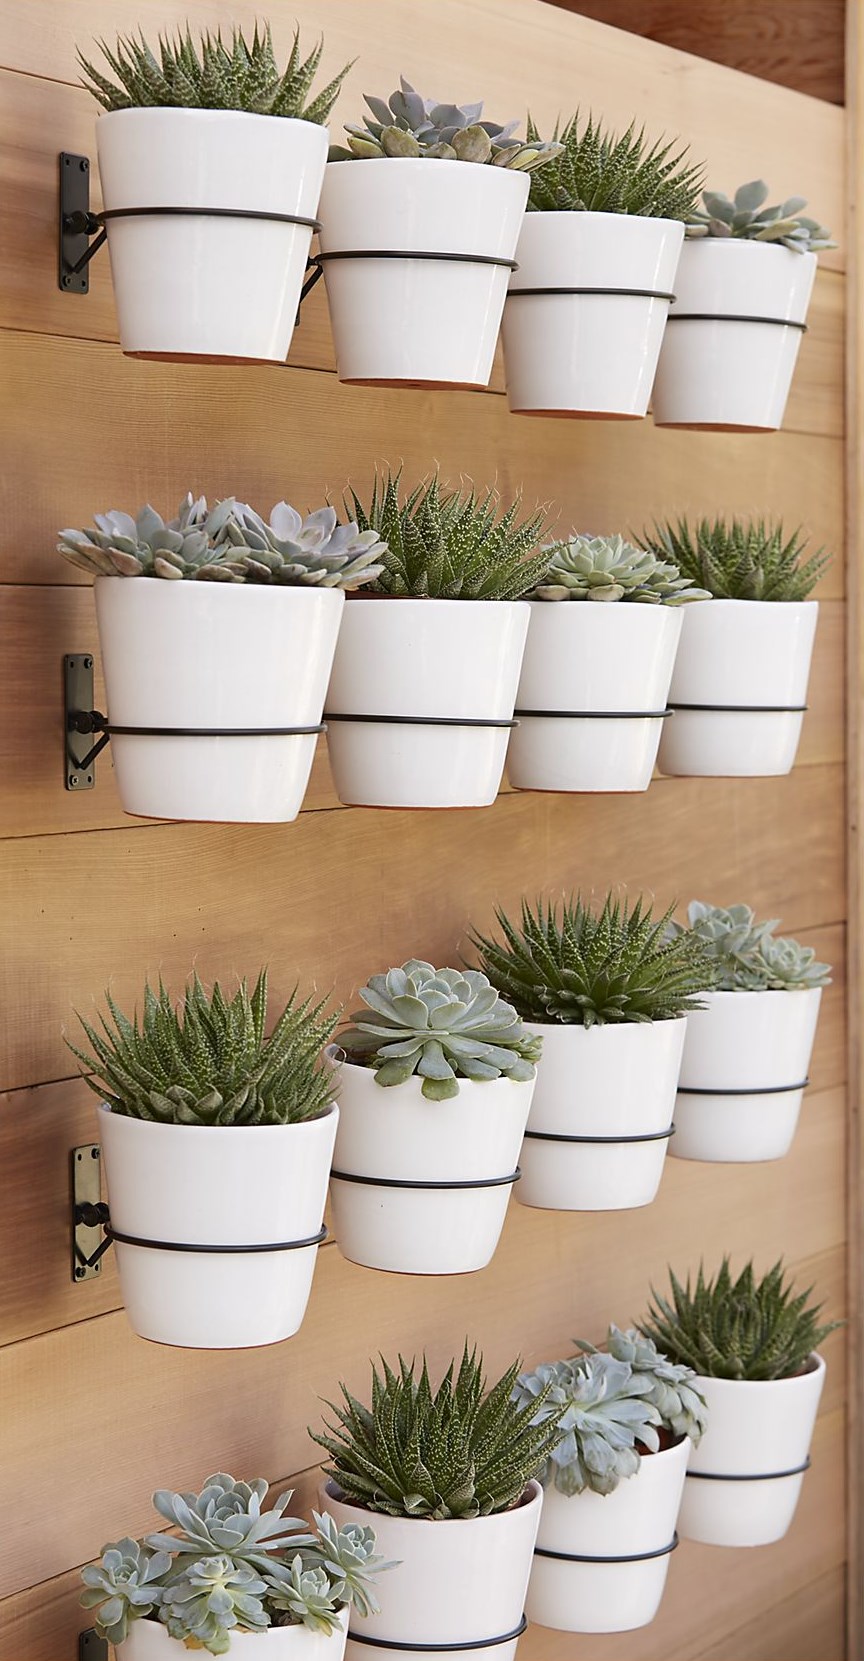 Wall planter hooks from Crate & Barrel